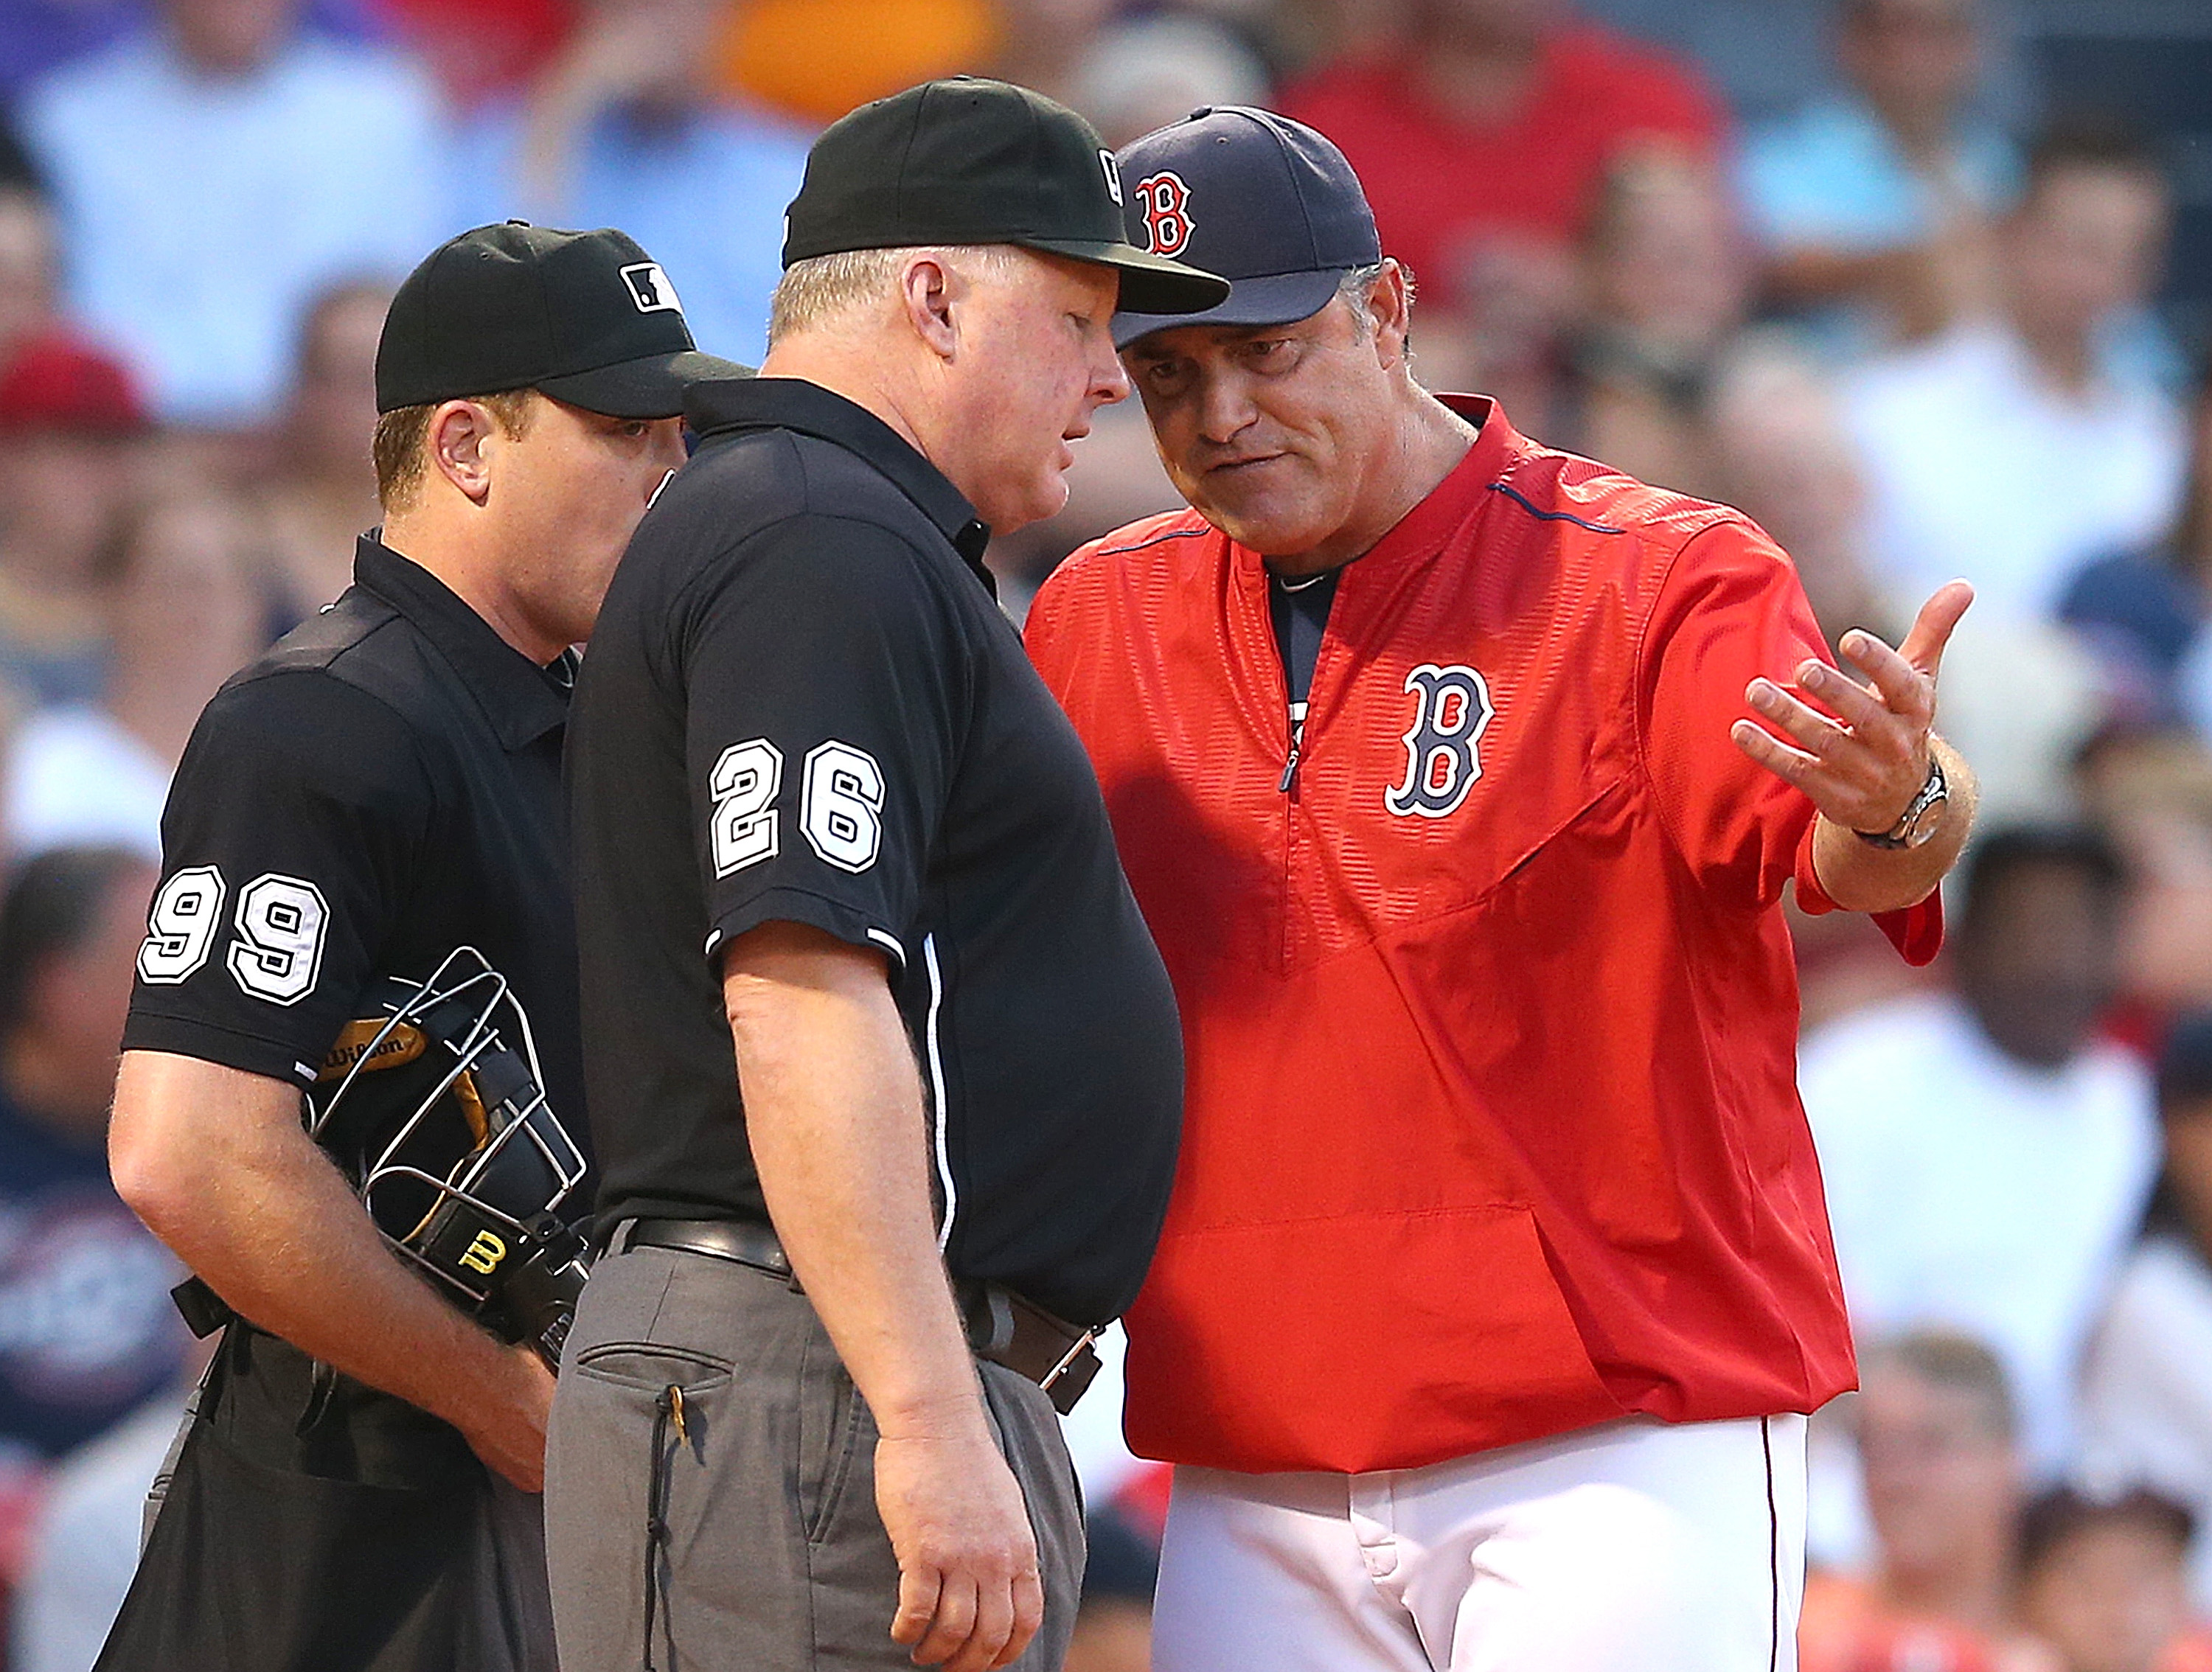 Farrell was a coach for several years before his first managerial job with Toronto (Getty)